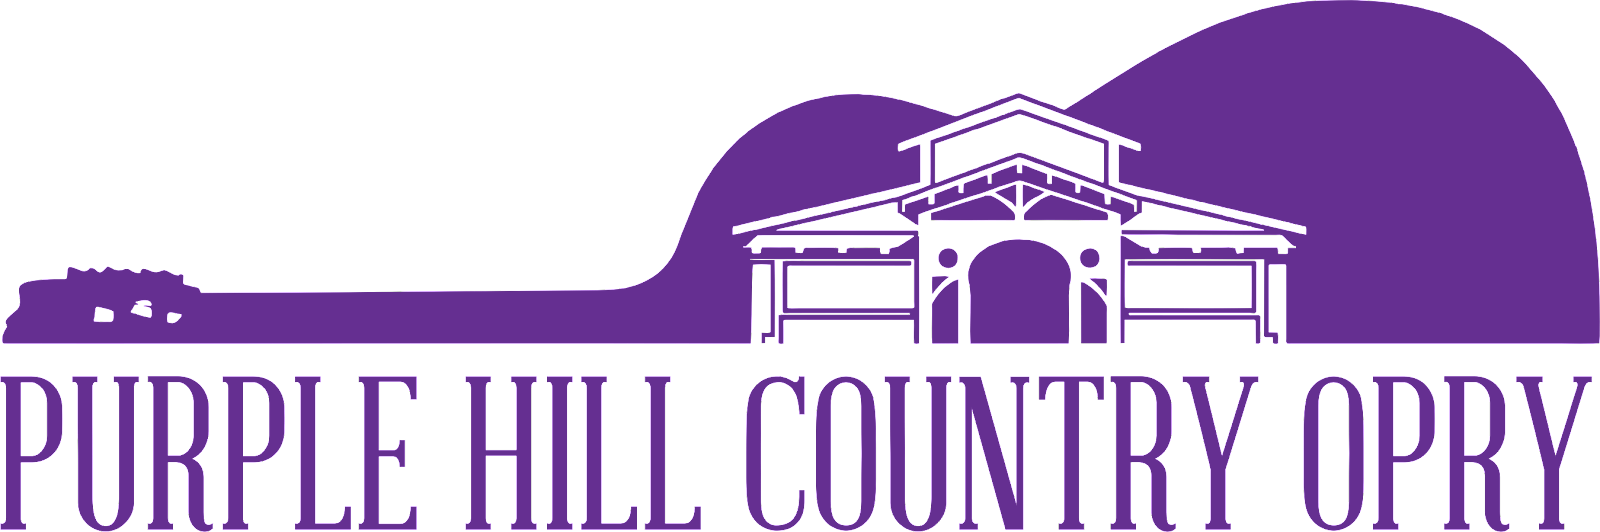 Purple Hill Country Opry Logo